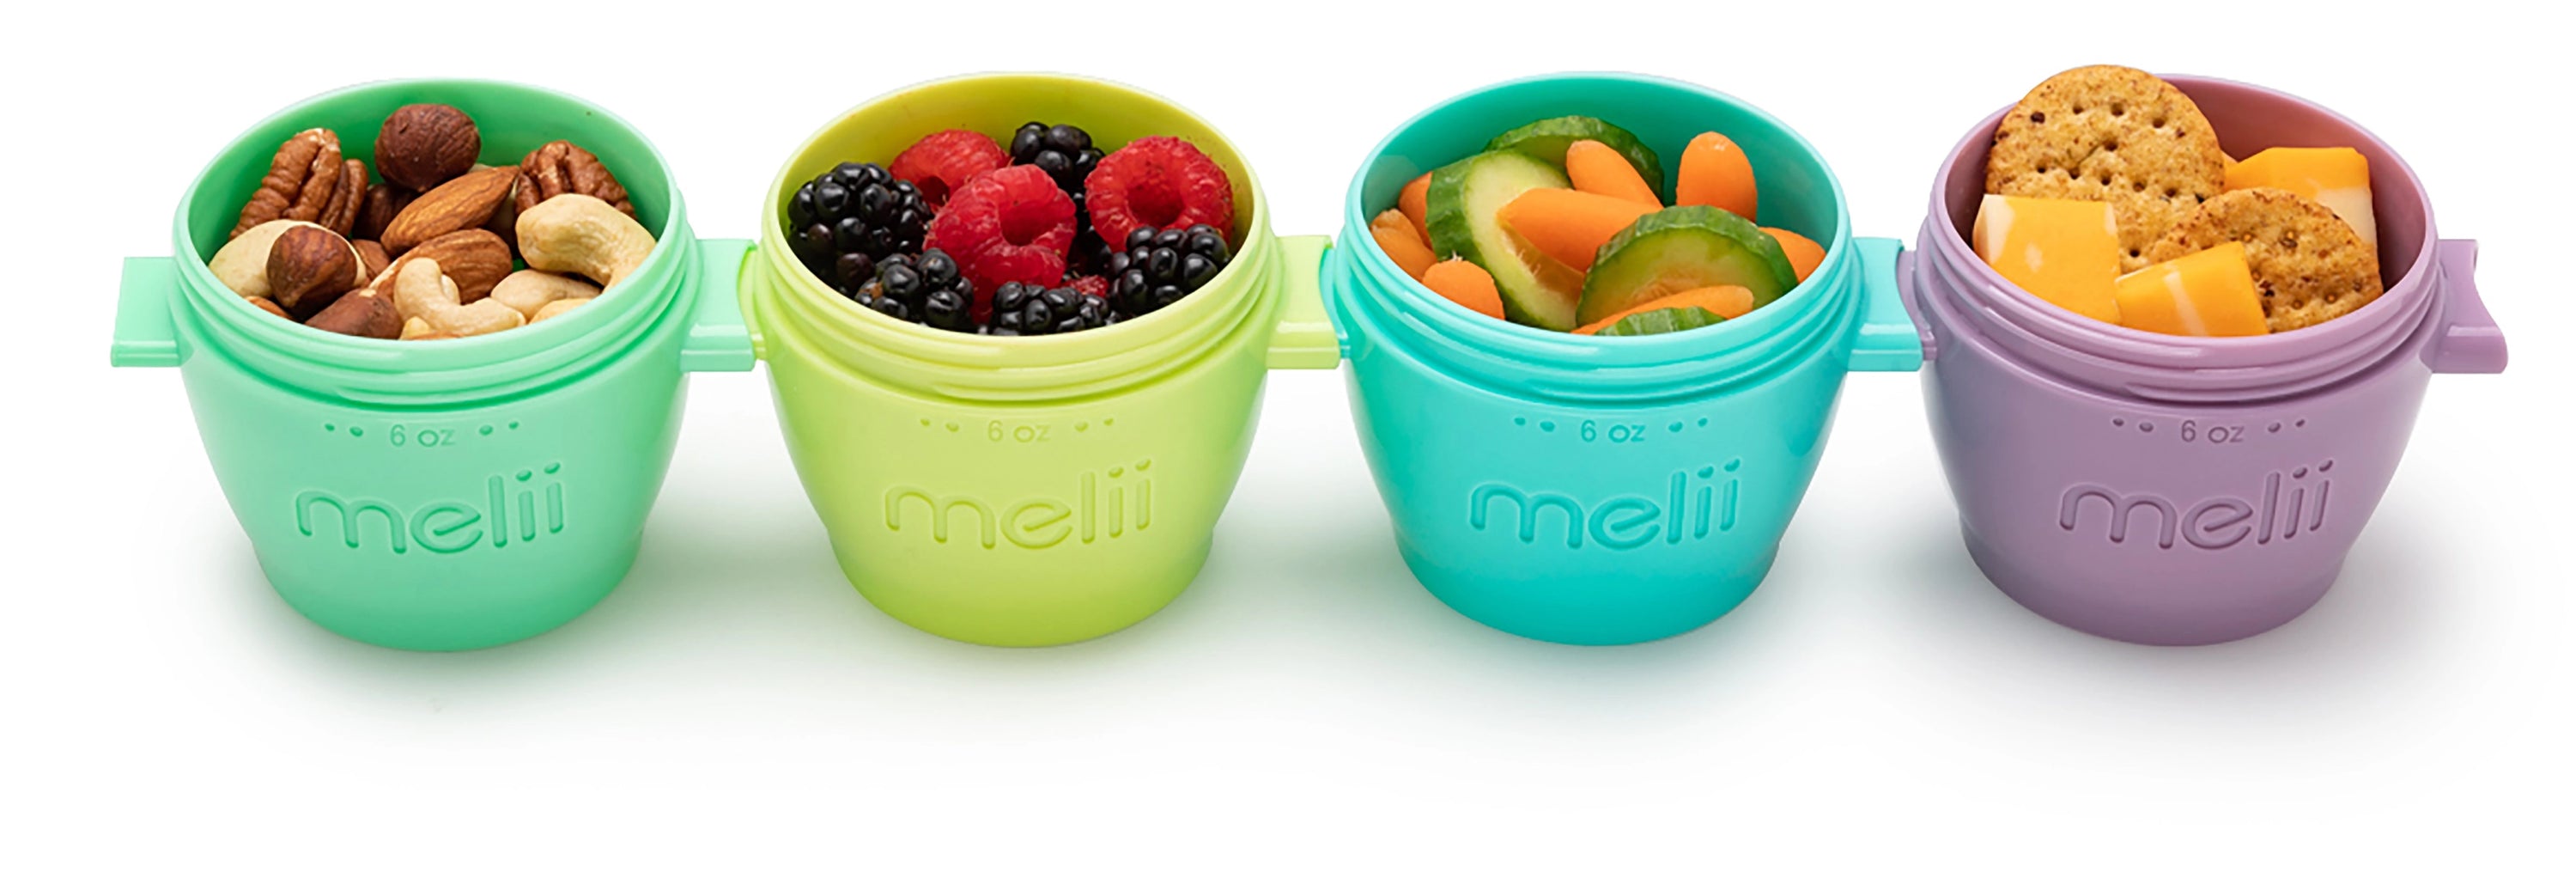 Melii 6oz Snap & Go Pods - 4 Freezer & Snack Containers